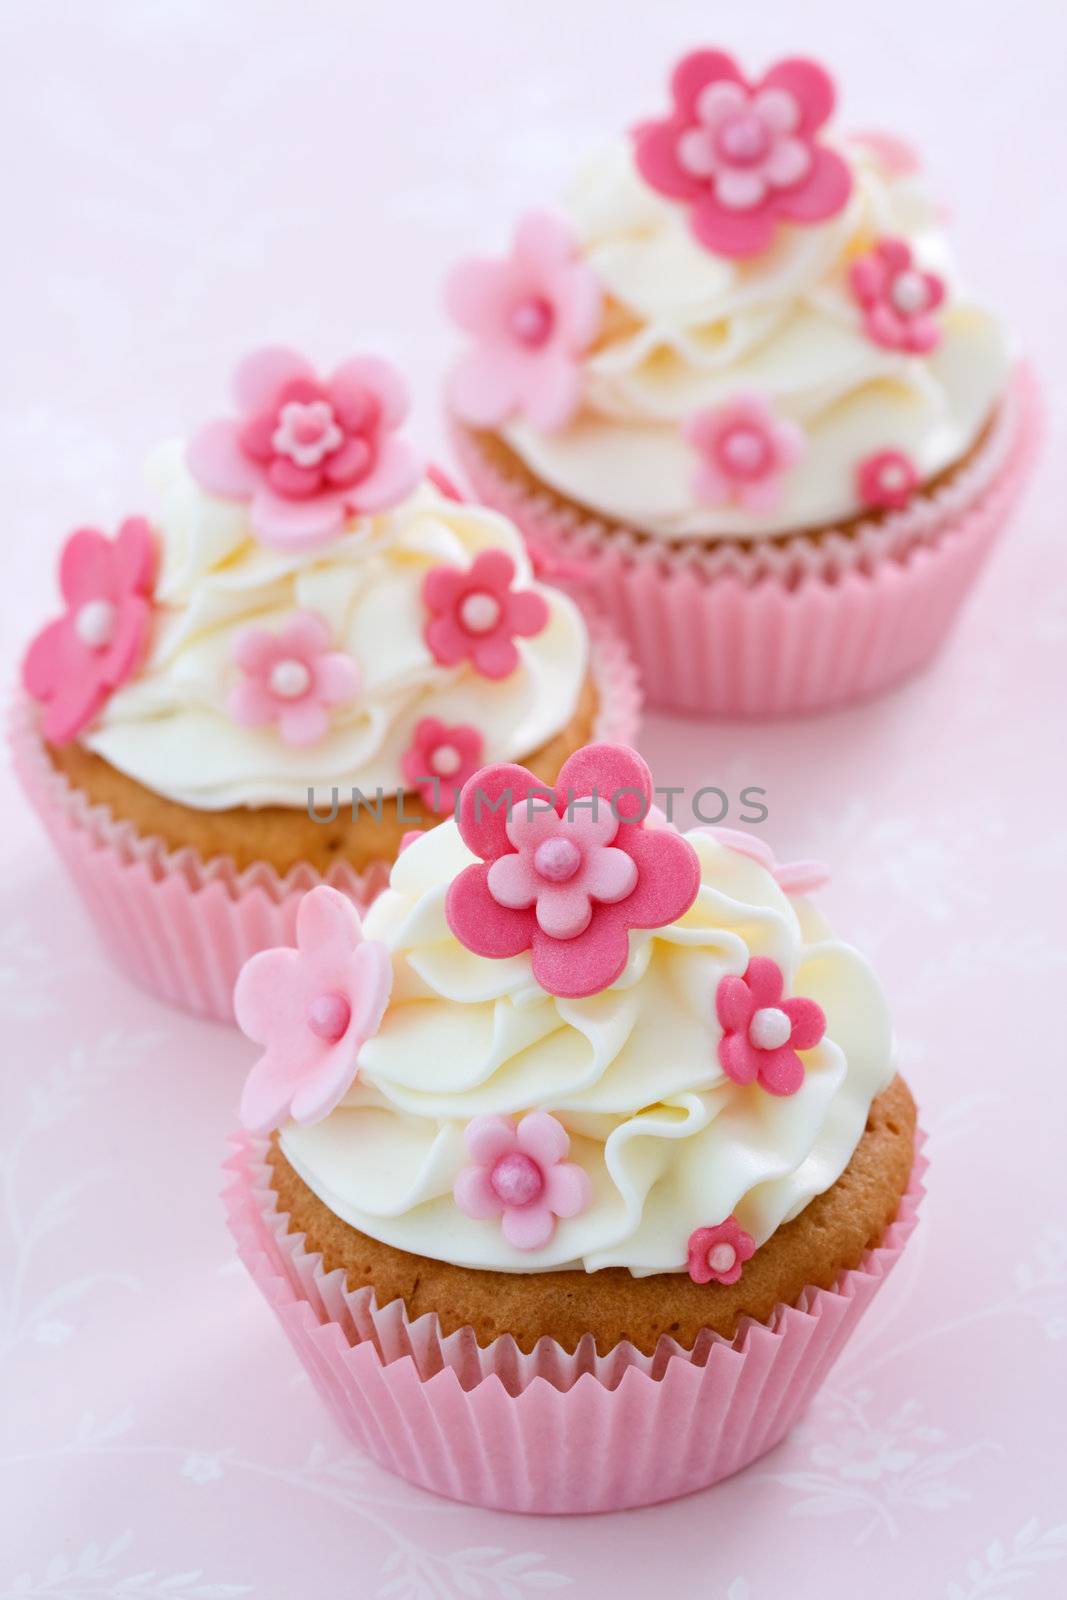 Cupcakes decorated with pink fondant flowers